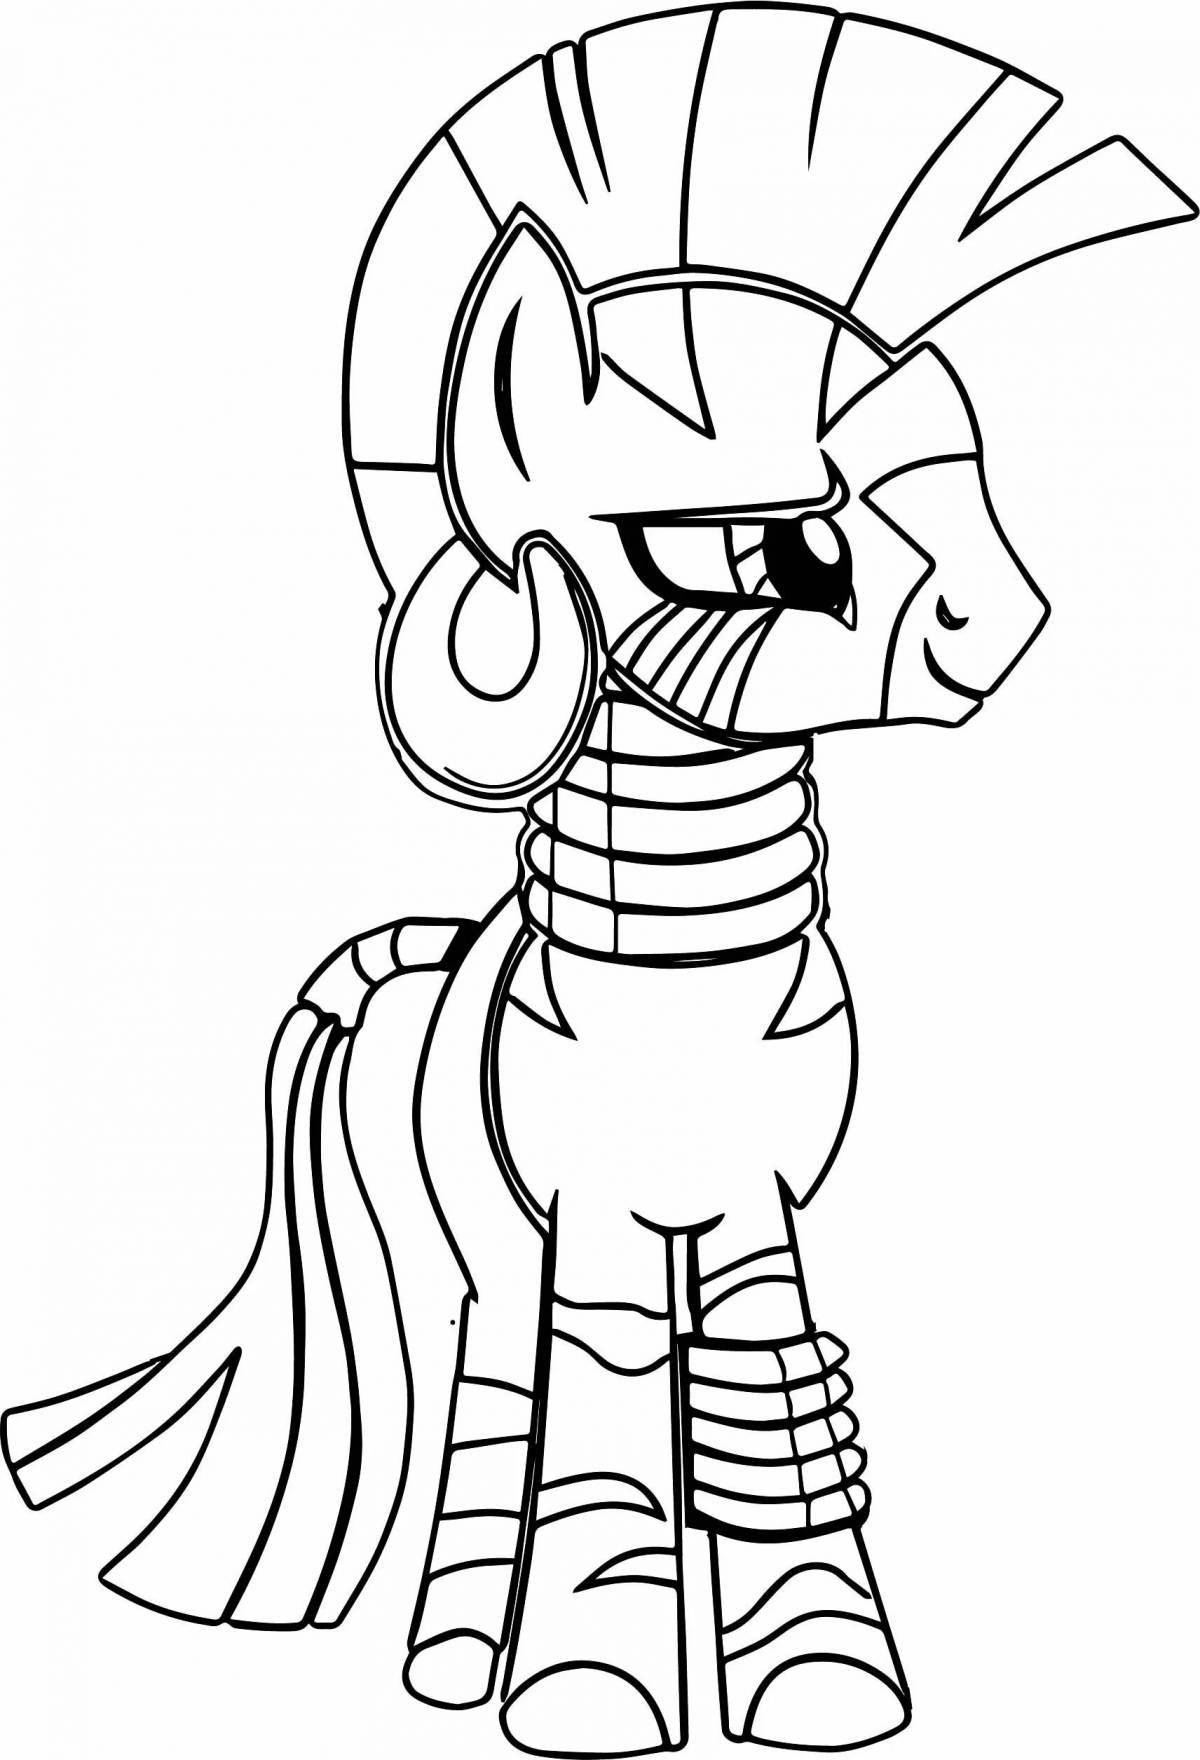 Glorious storm pony coloring page